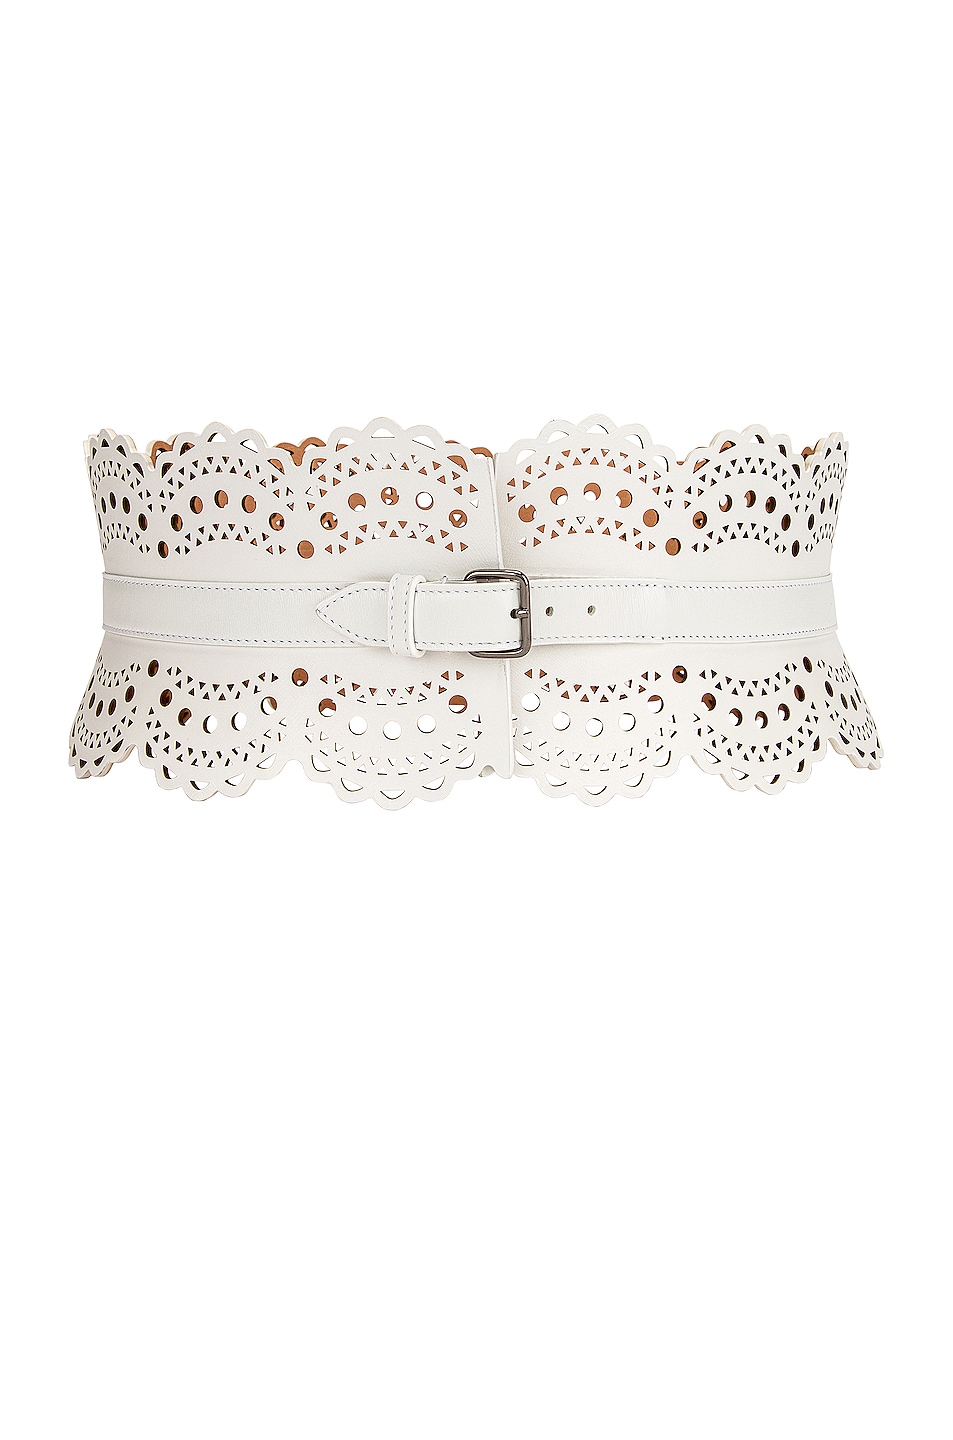 ALAÏA Perforated Corset Belt in White